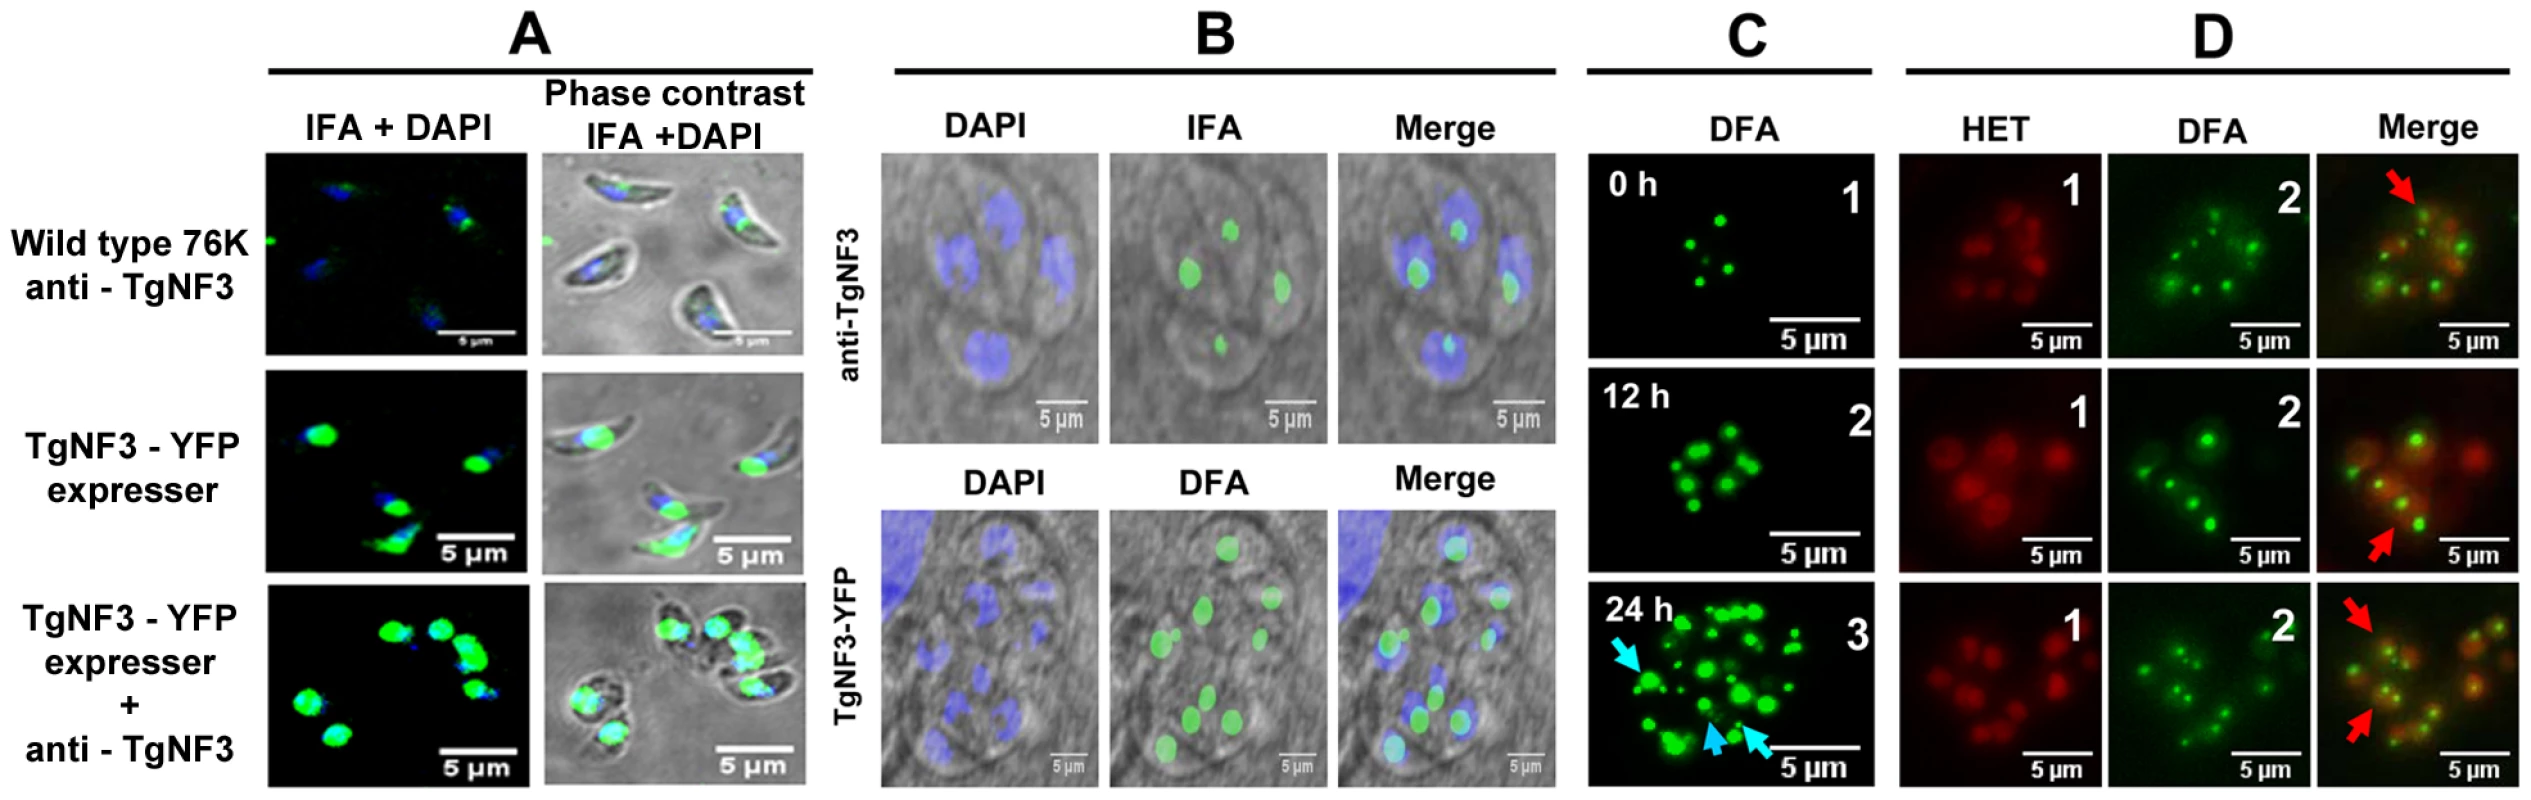 Native TgNF3 and transgenic TgNF3-YFP proteins are preponderant nucleolar resident factors.